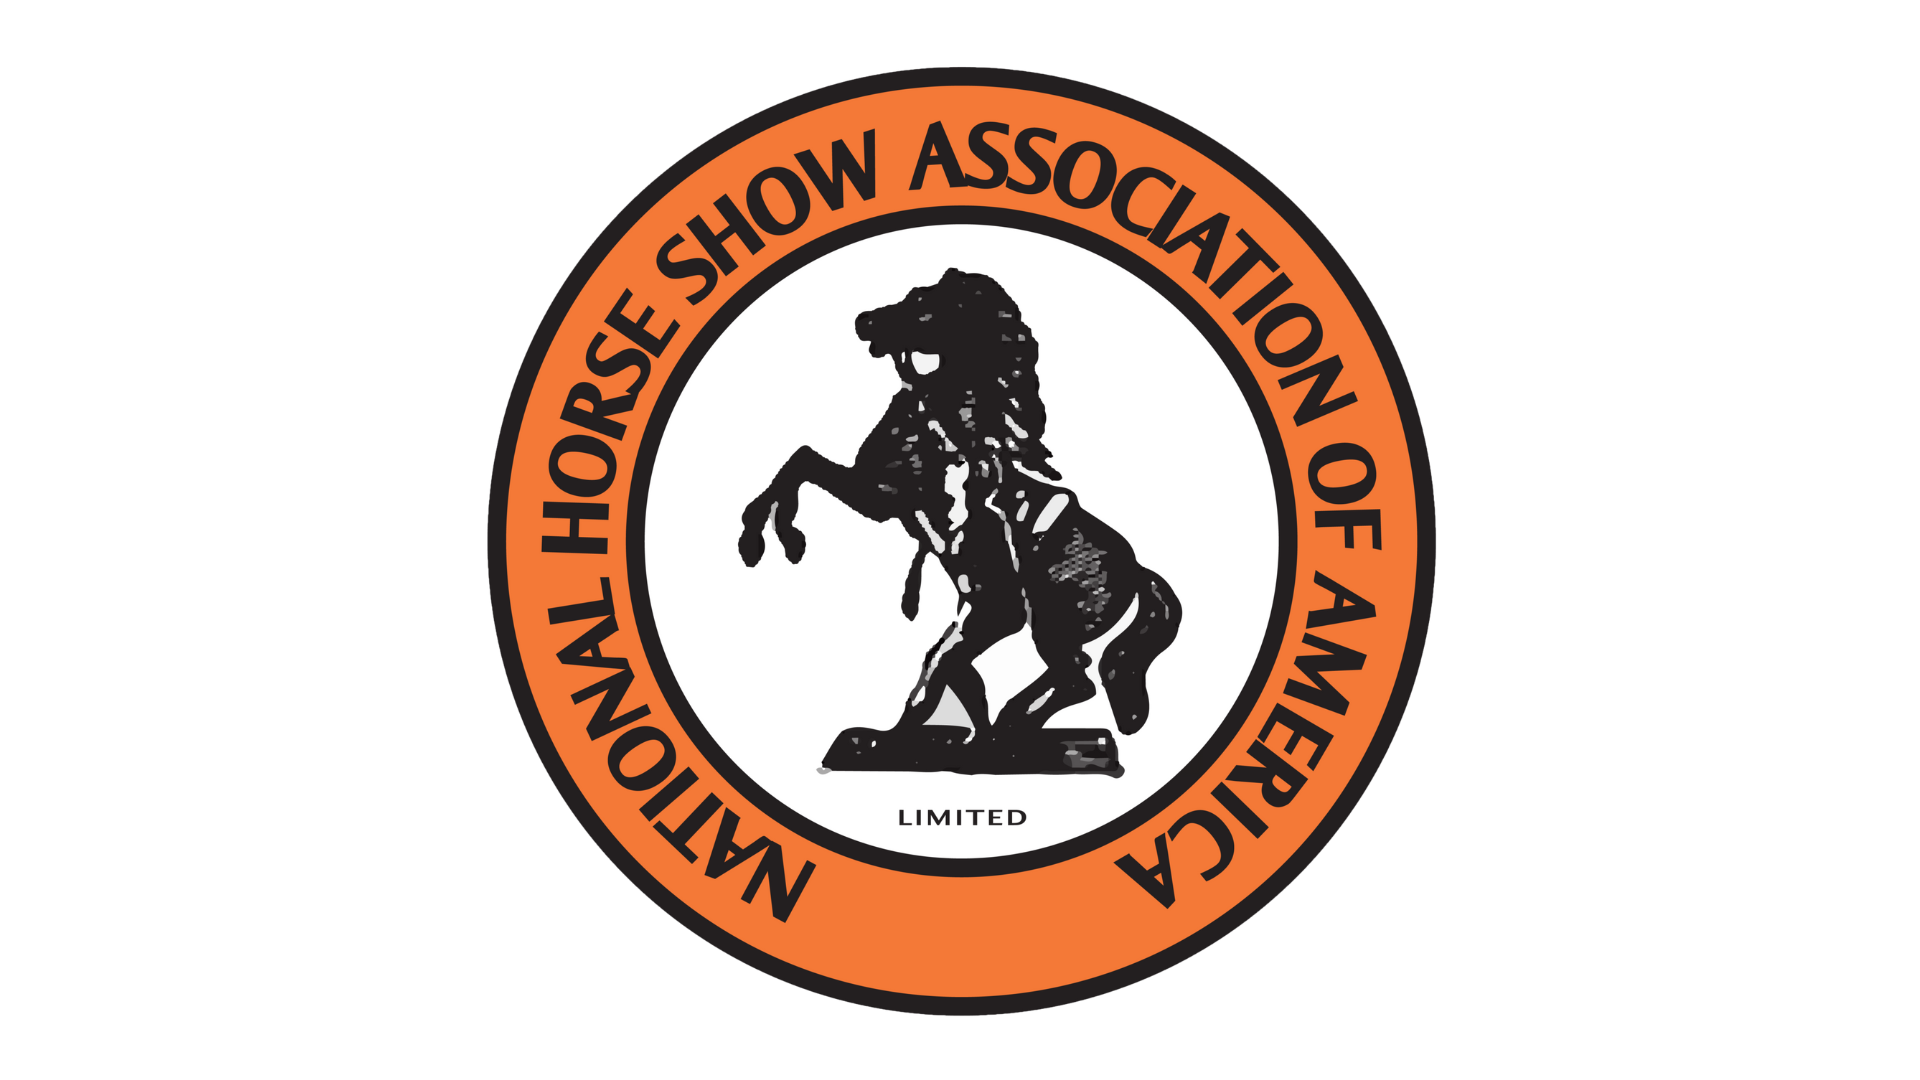 EA Limited Inc. proudly sold at the National Horse Show in Lexington, KY.